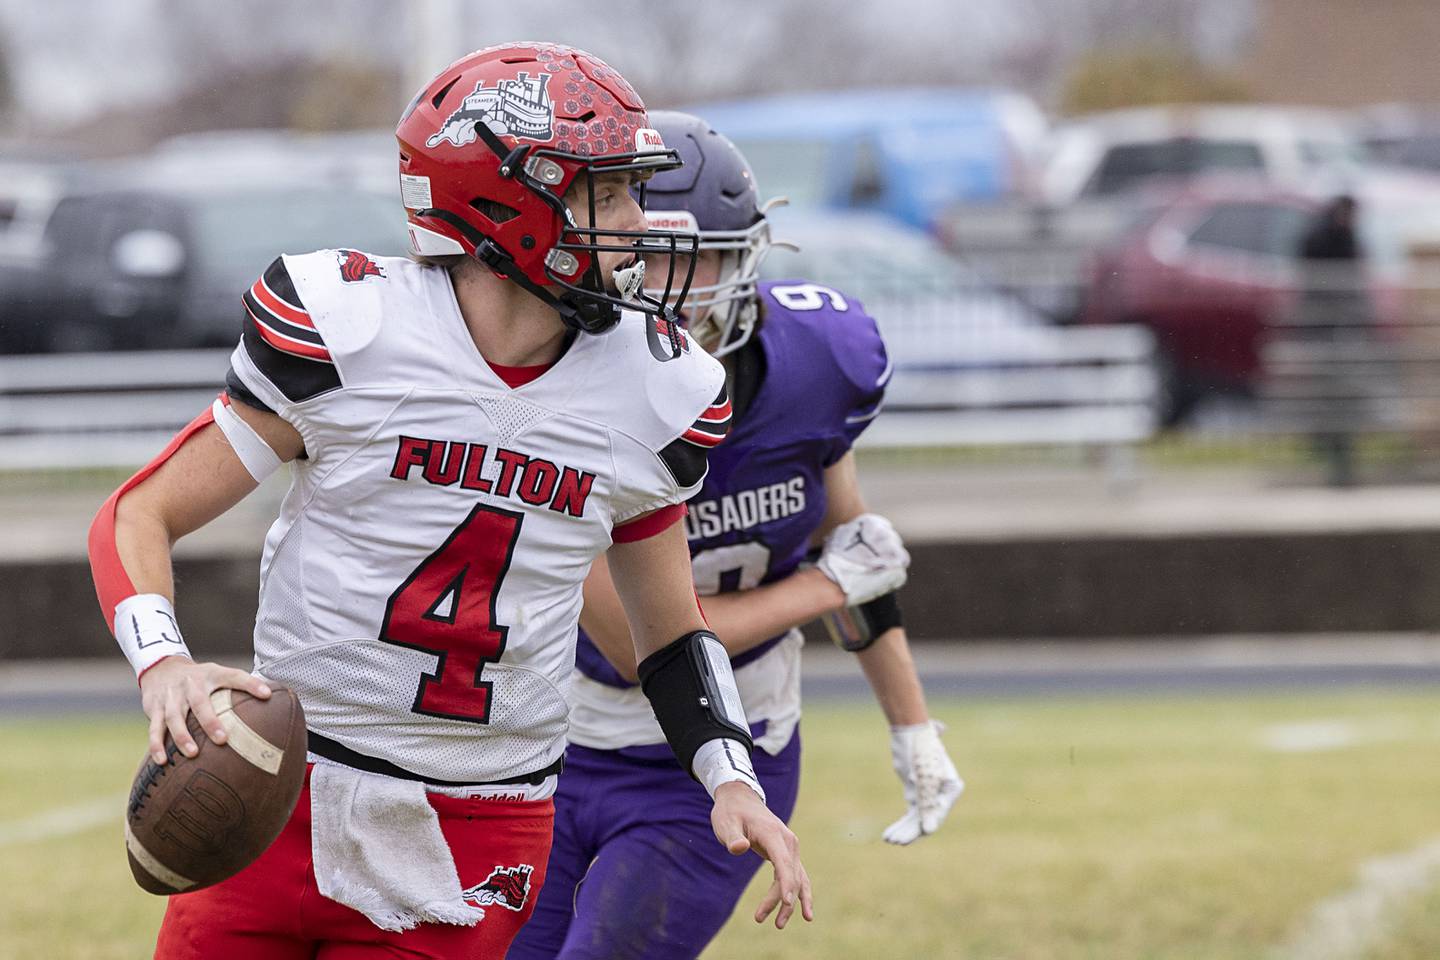 Fulton’s Brayden Dykstra looks for a receiver Saturday, Nov. 5, 2022 during a round two football playoff game against Rockford Lutheran.